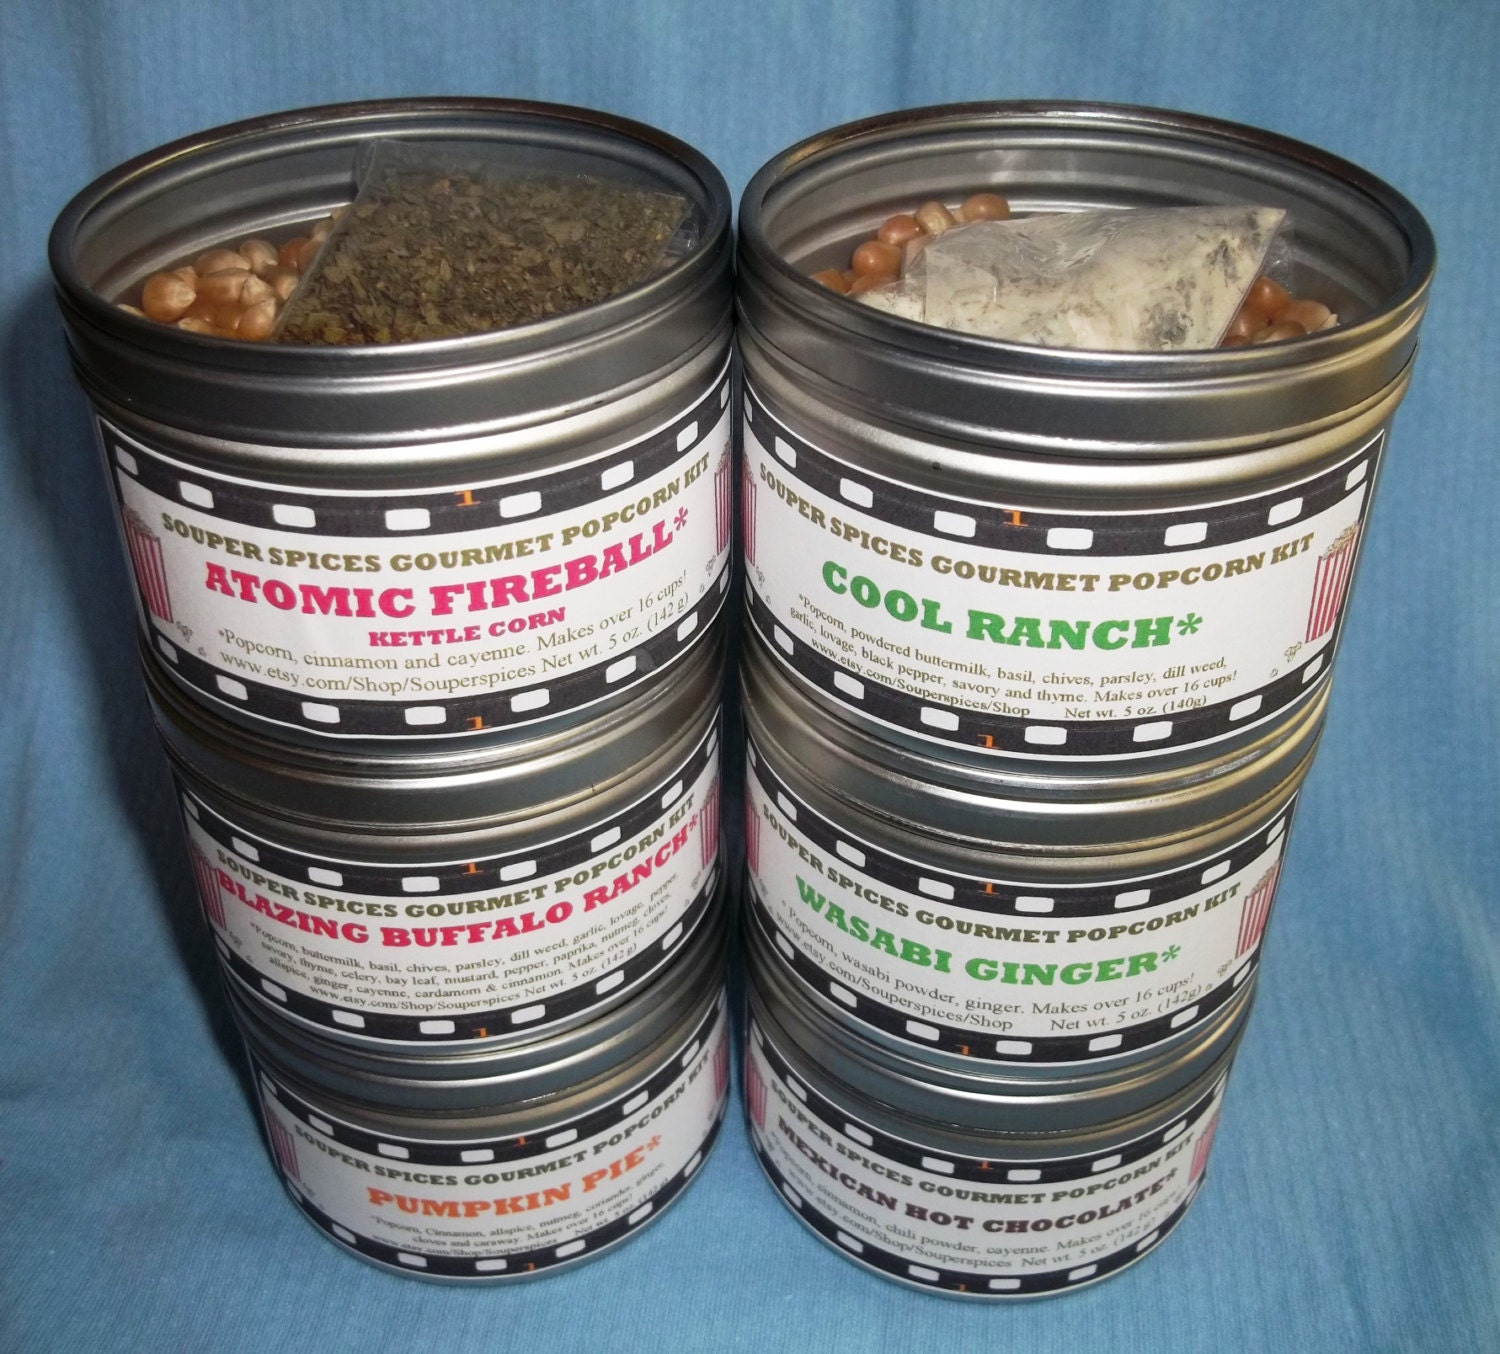 4 Spice Jar Soup Broth Powdered Mix Sampler Pack at Firehouse Flavors